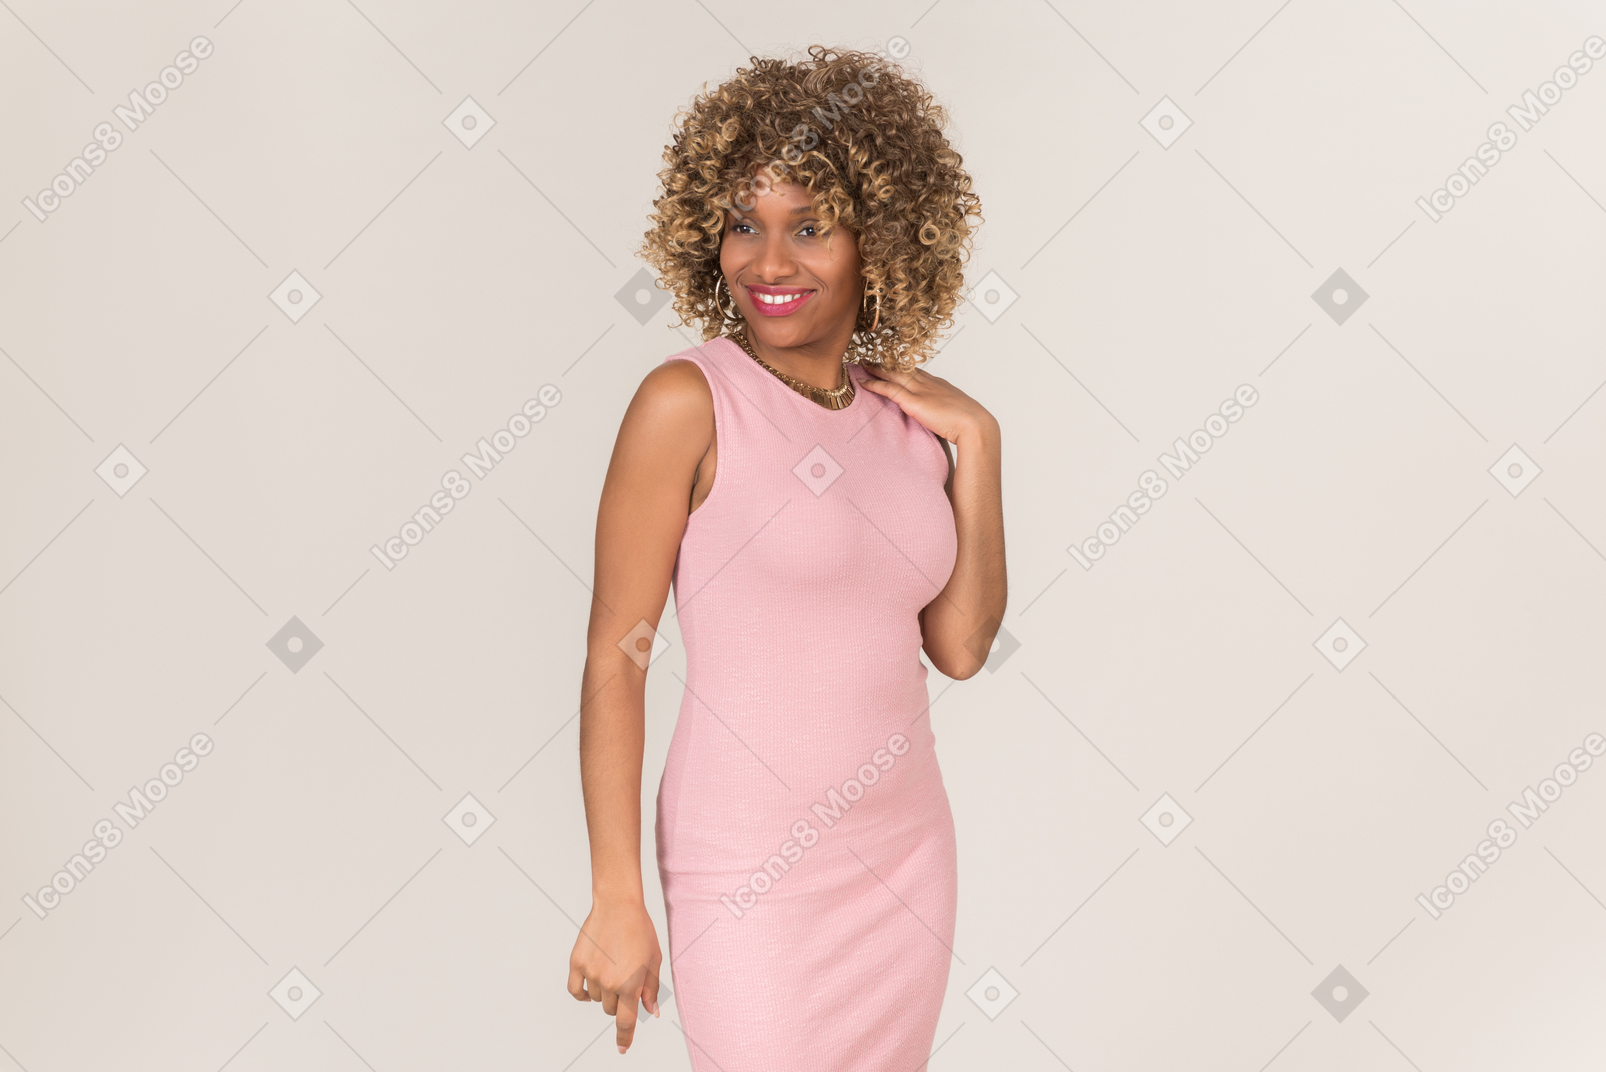 A woman in pink dress standing and smiling